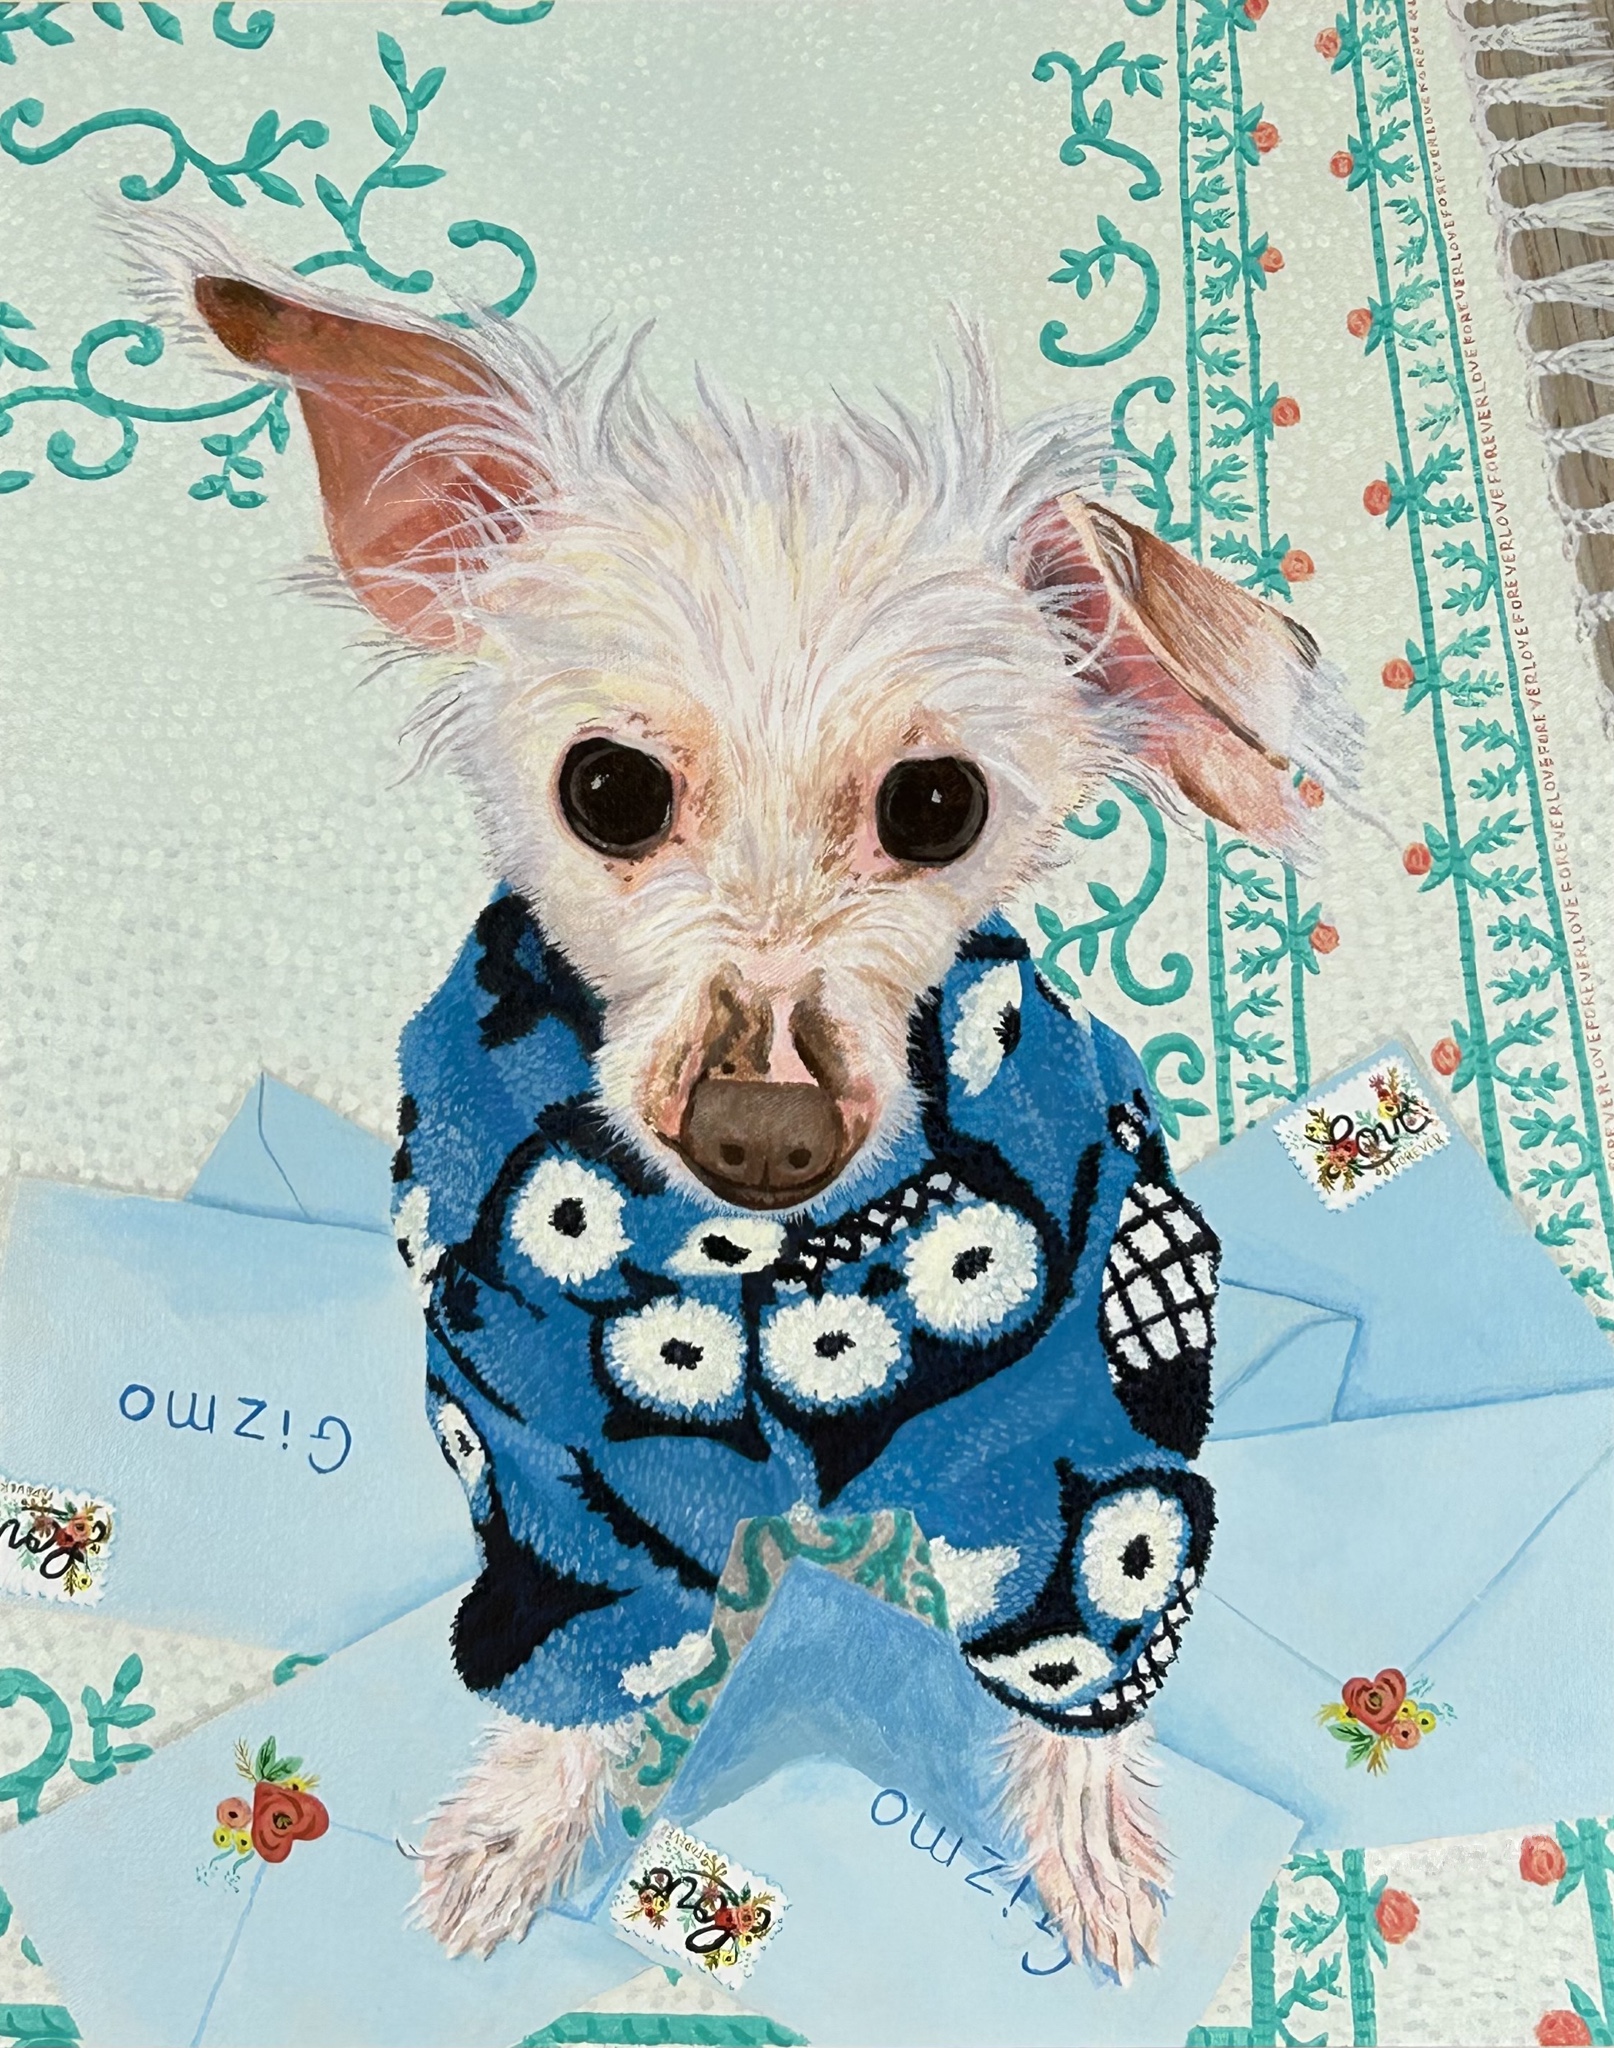 White dog looking up at viewer in blue, white, and black sweater sits on a pile of blue envelopes with the name Gizmo on them, which is sitting on top of a white rug with green leaf and red rose design